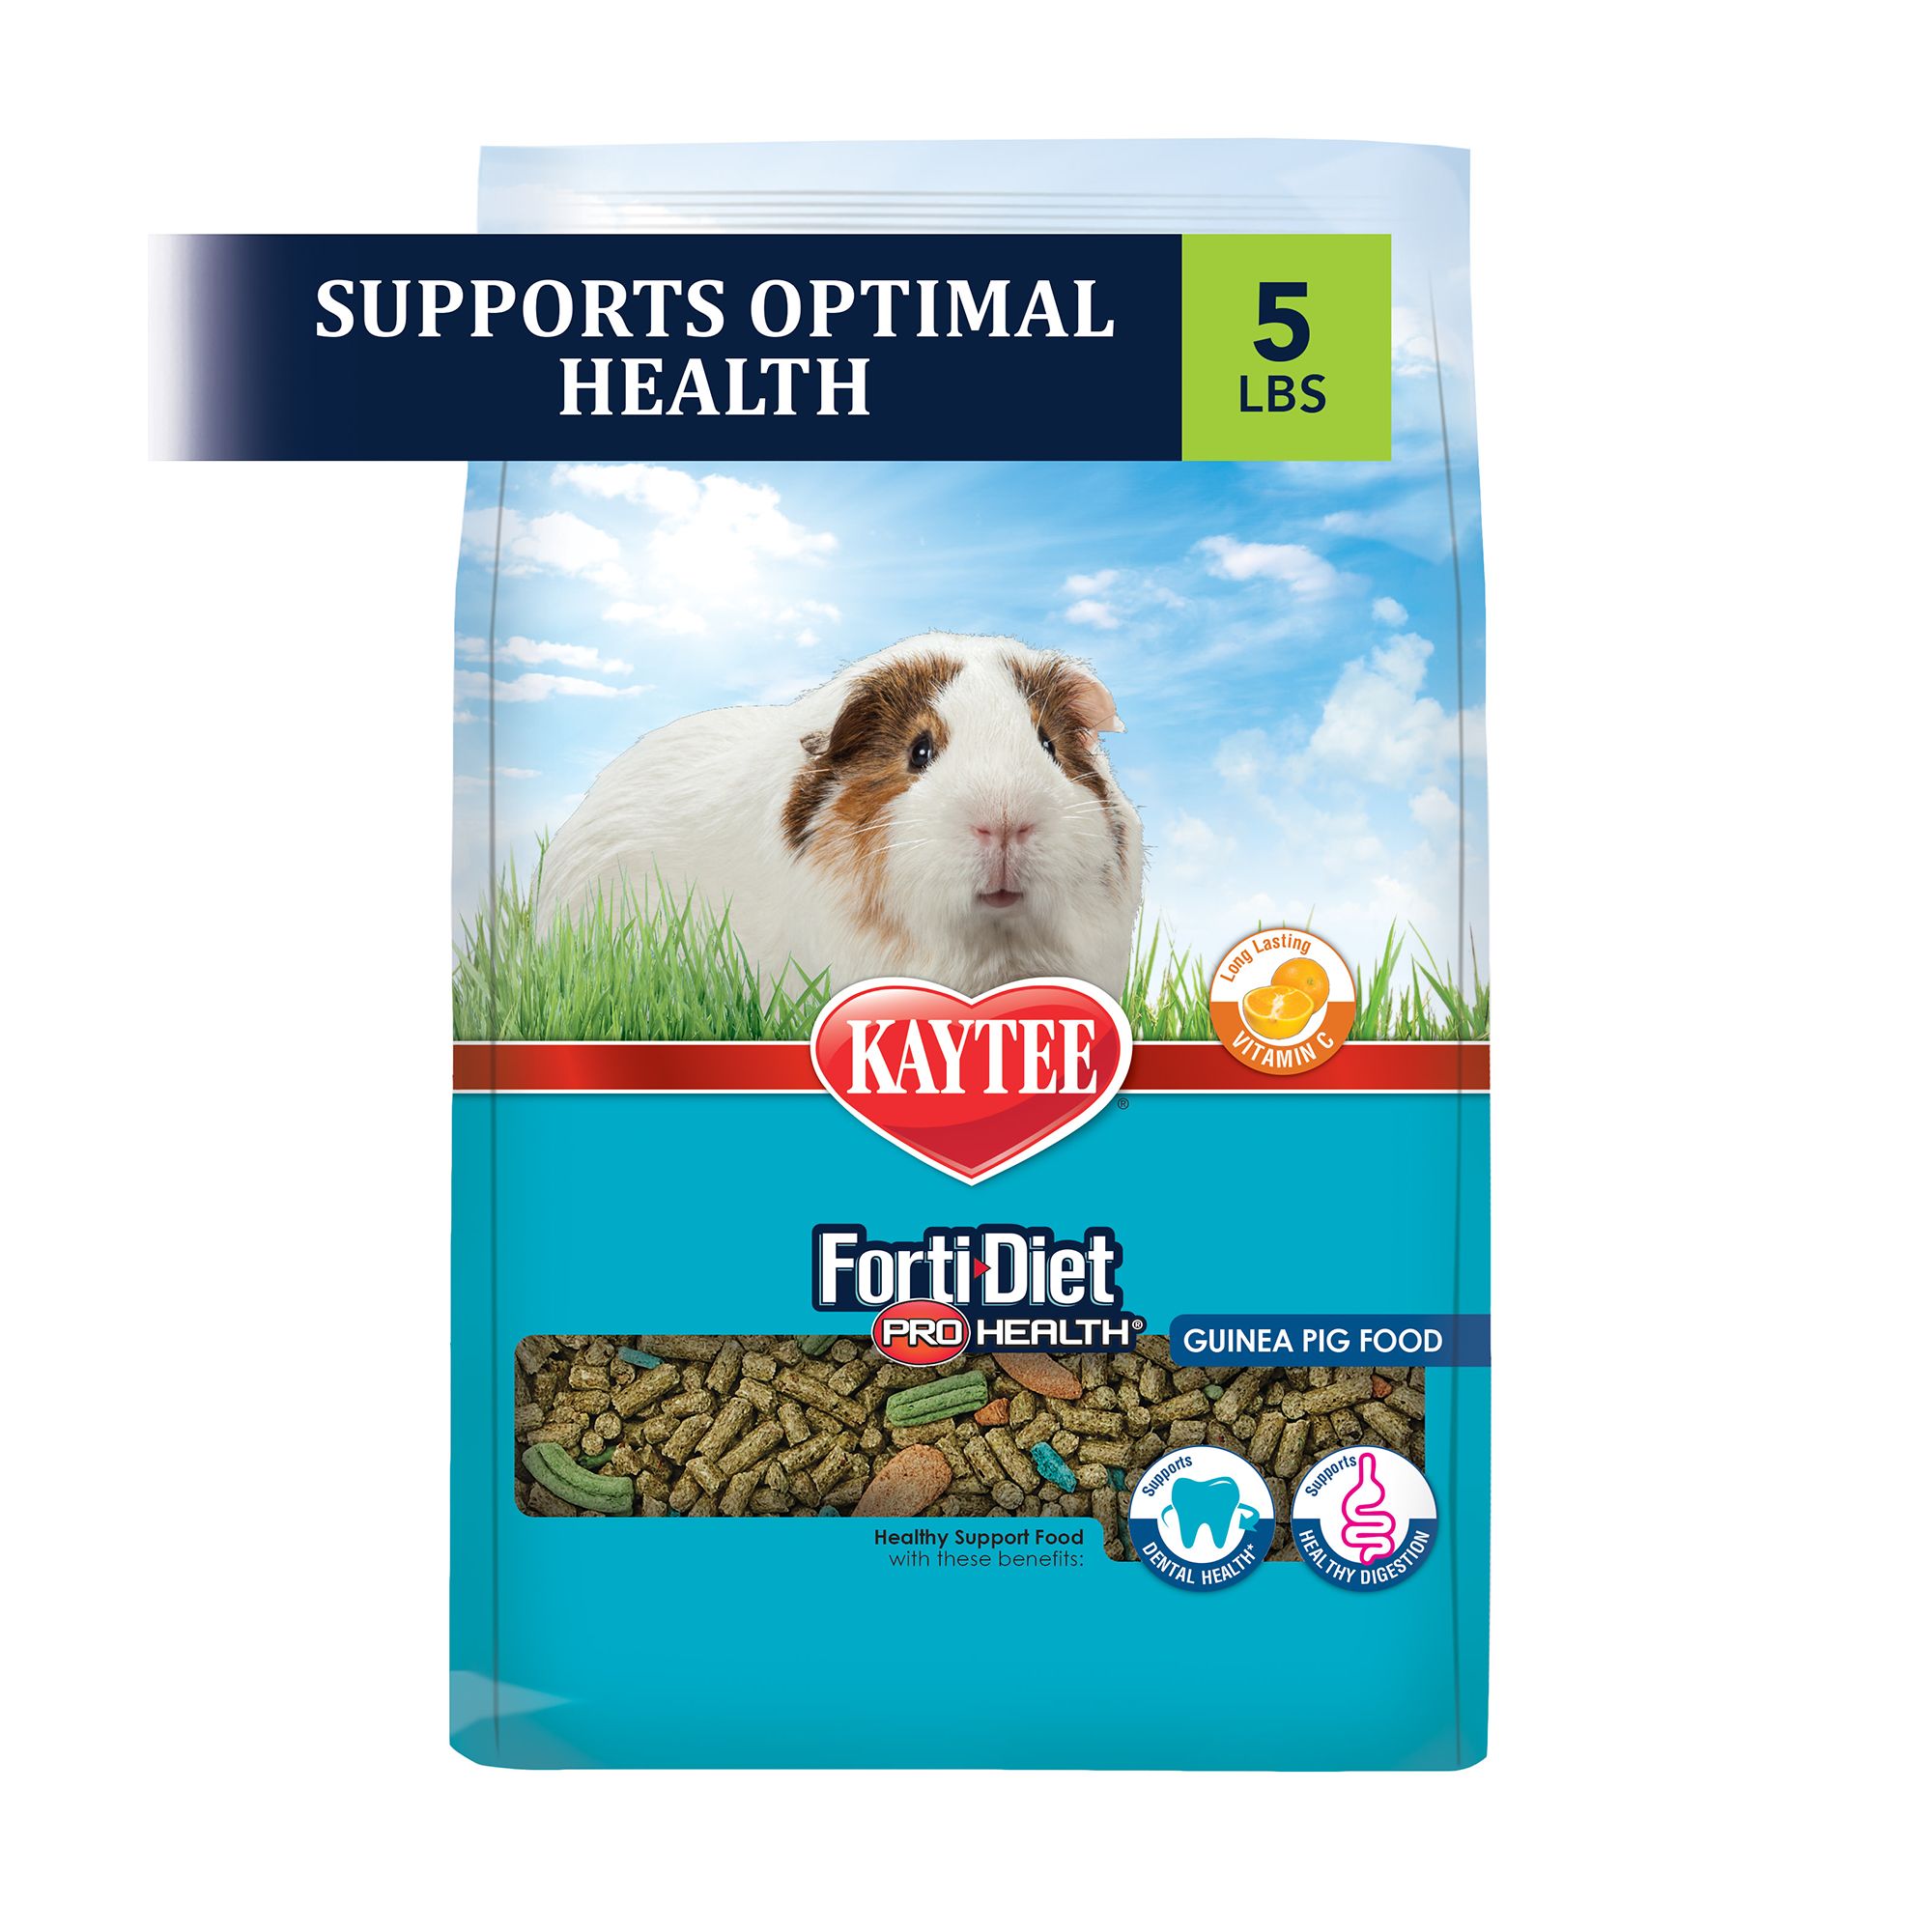 Forti-Diet Pro Health Guinea Pig Food 